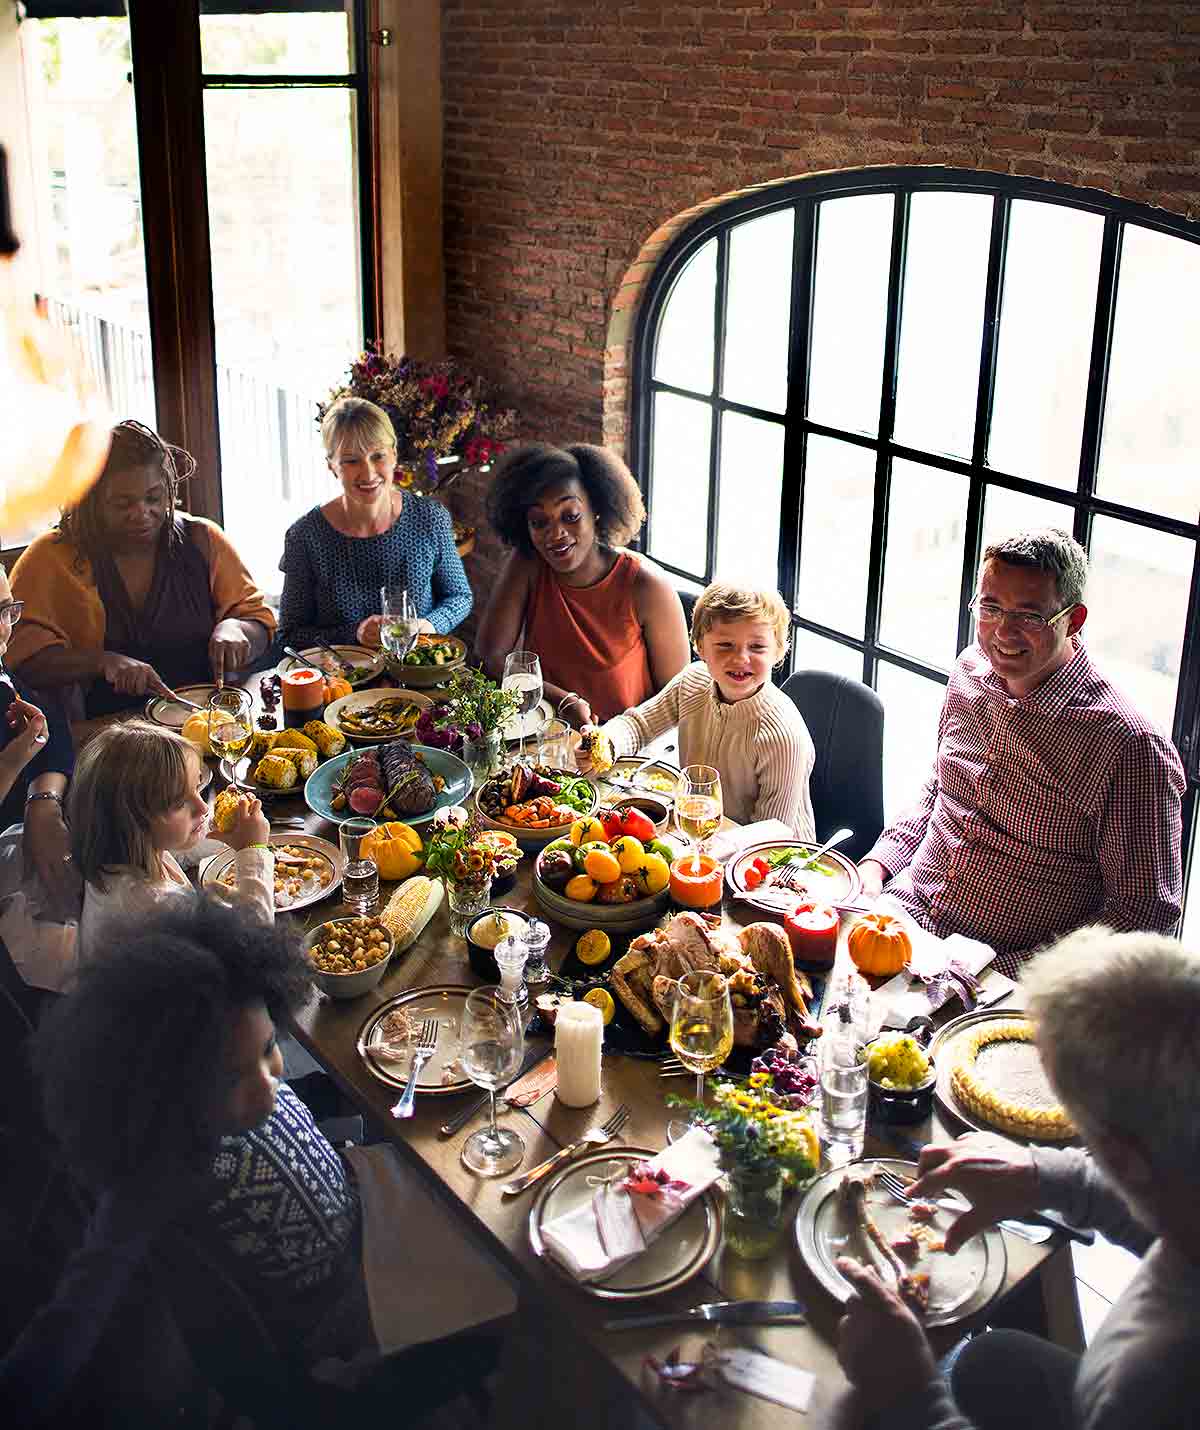 People gathered around a Thanksgiving table